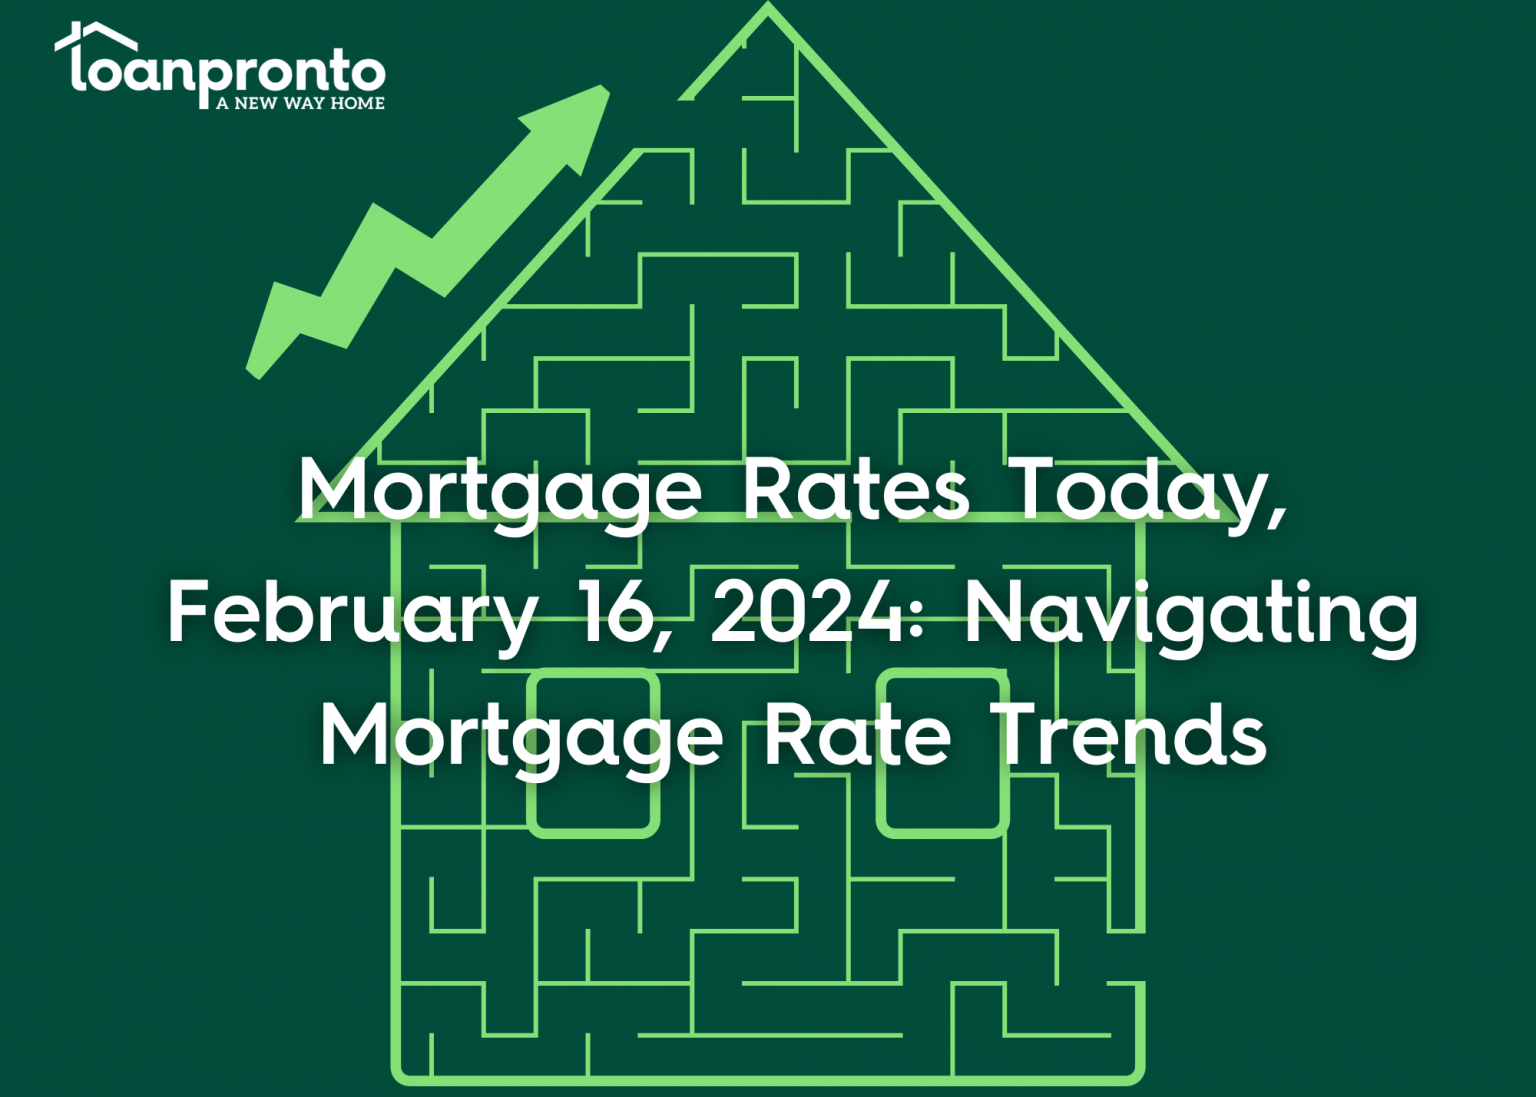 Naviagting mortgage rate trends using economic indicators and january cpi and ppi reports